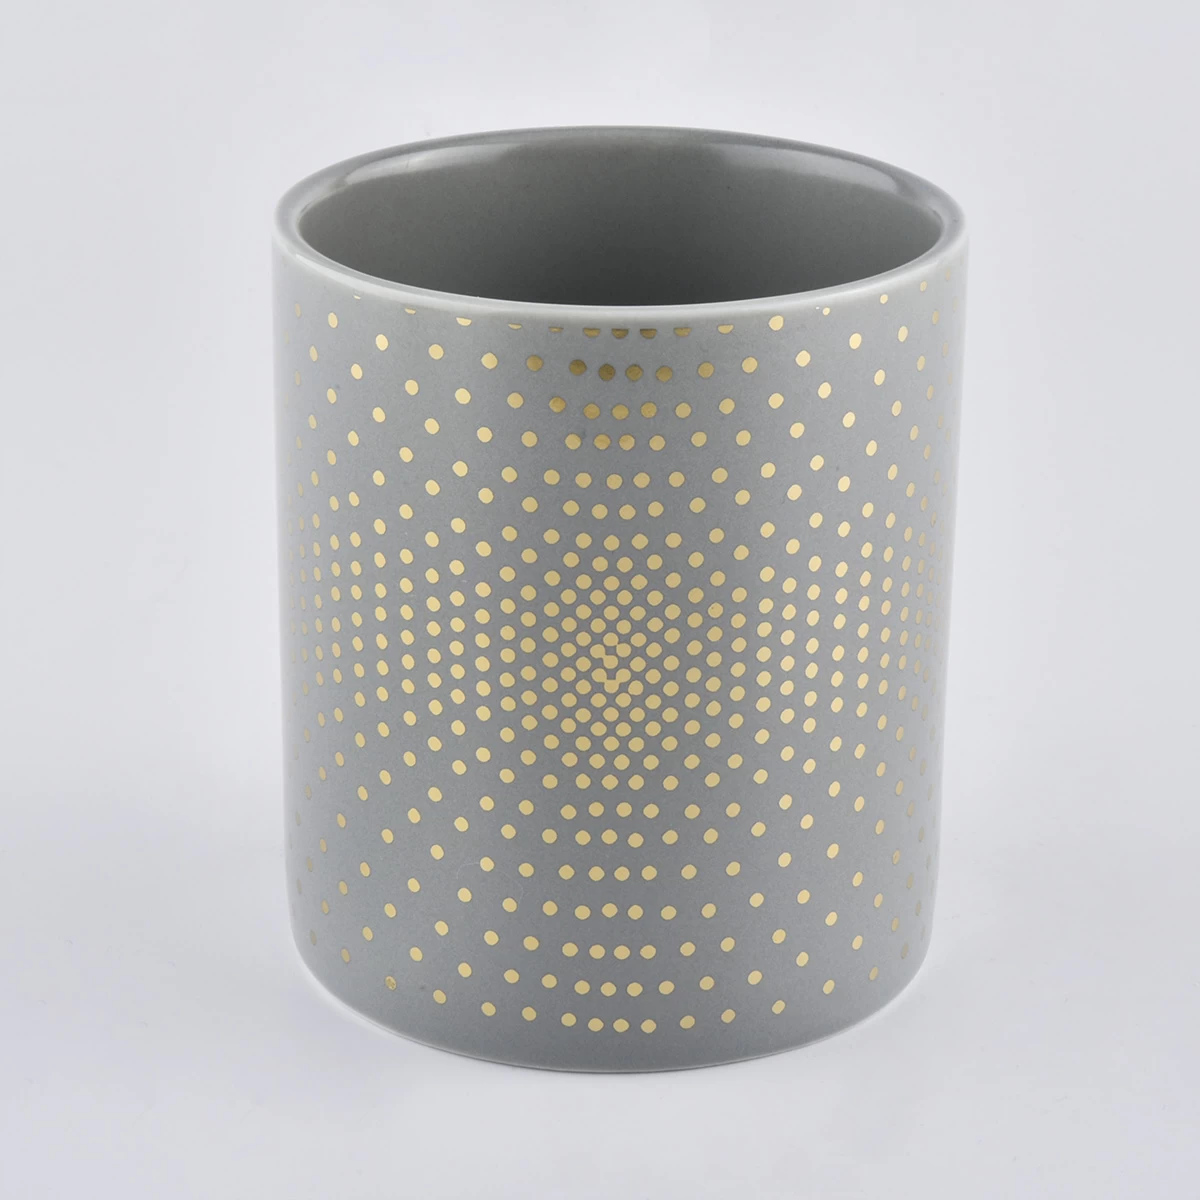 Cylinder ceramic candle container with gold prints, unique ceramic candle holder